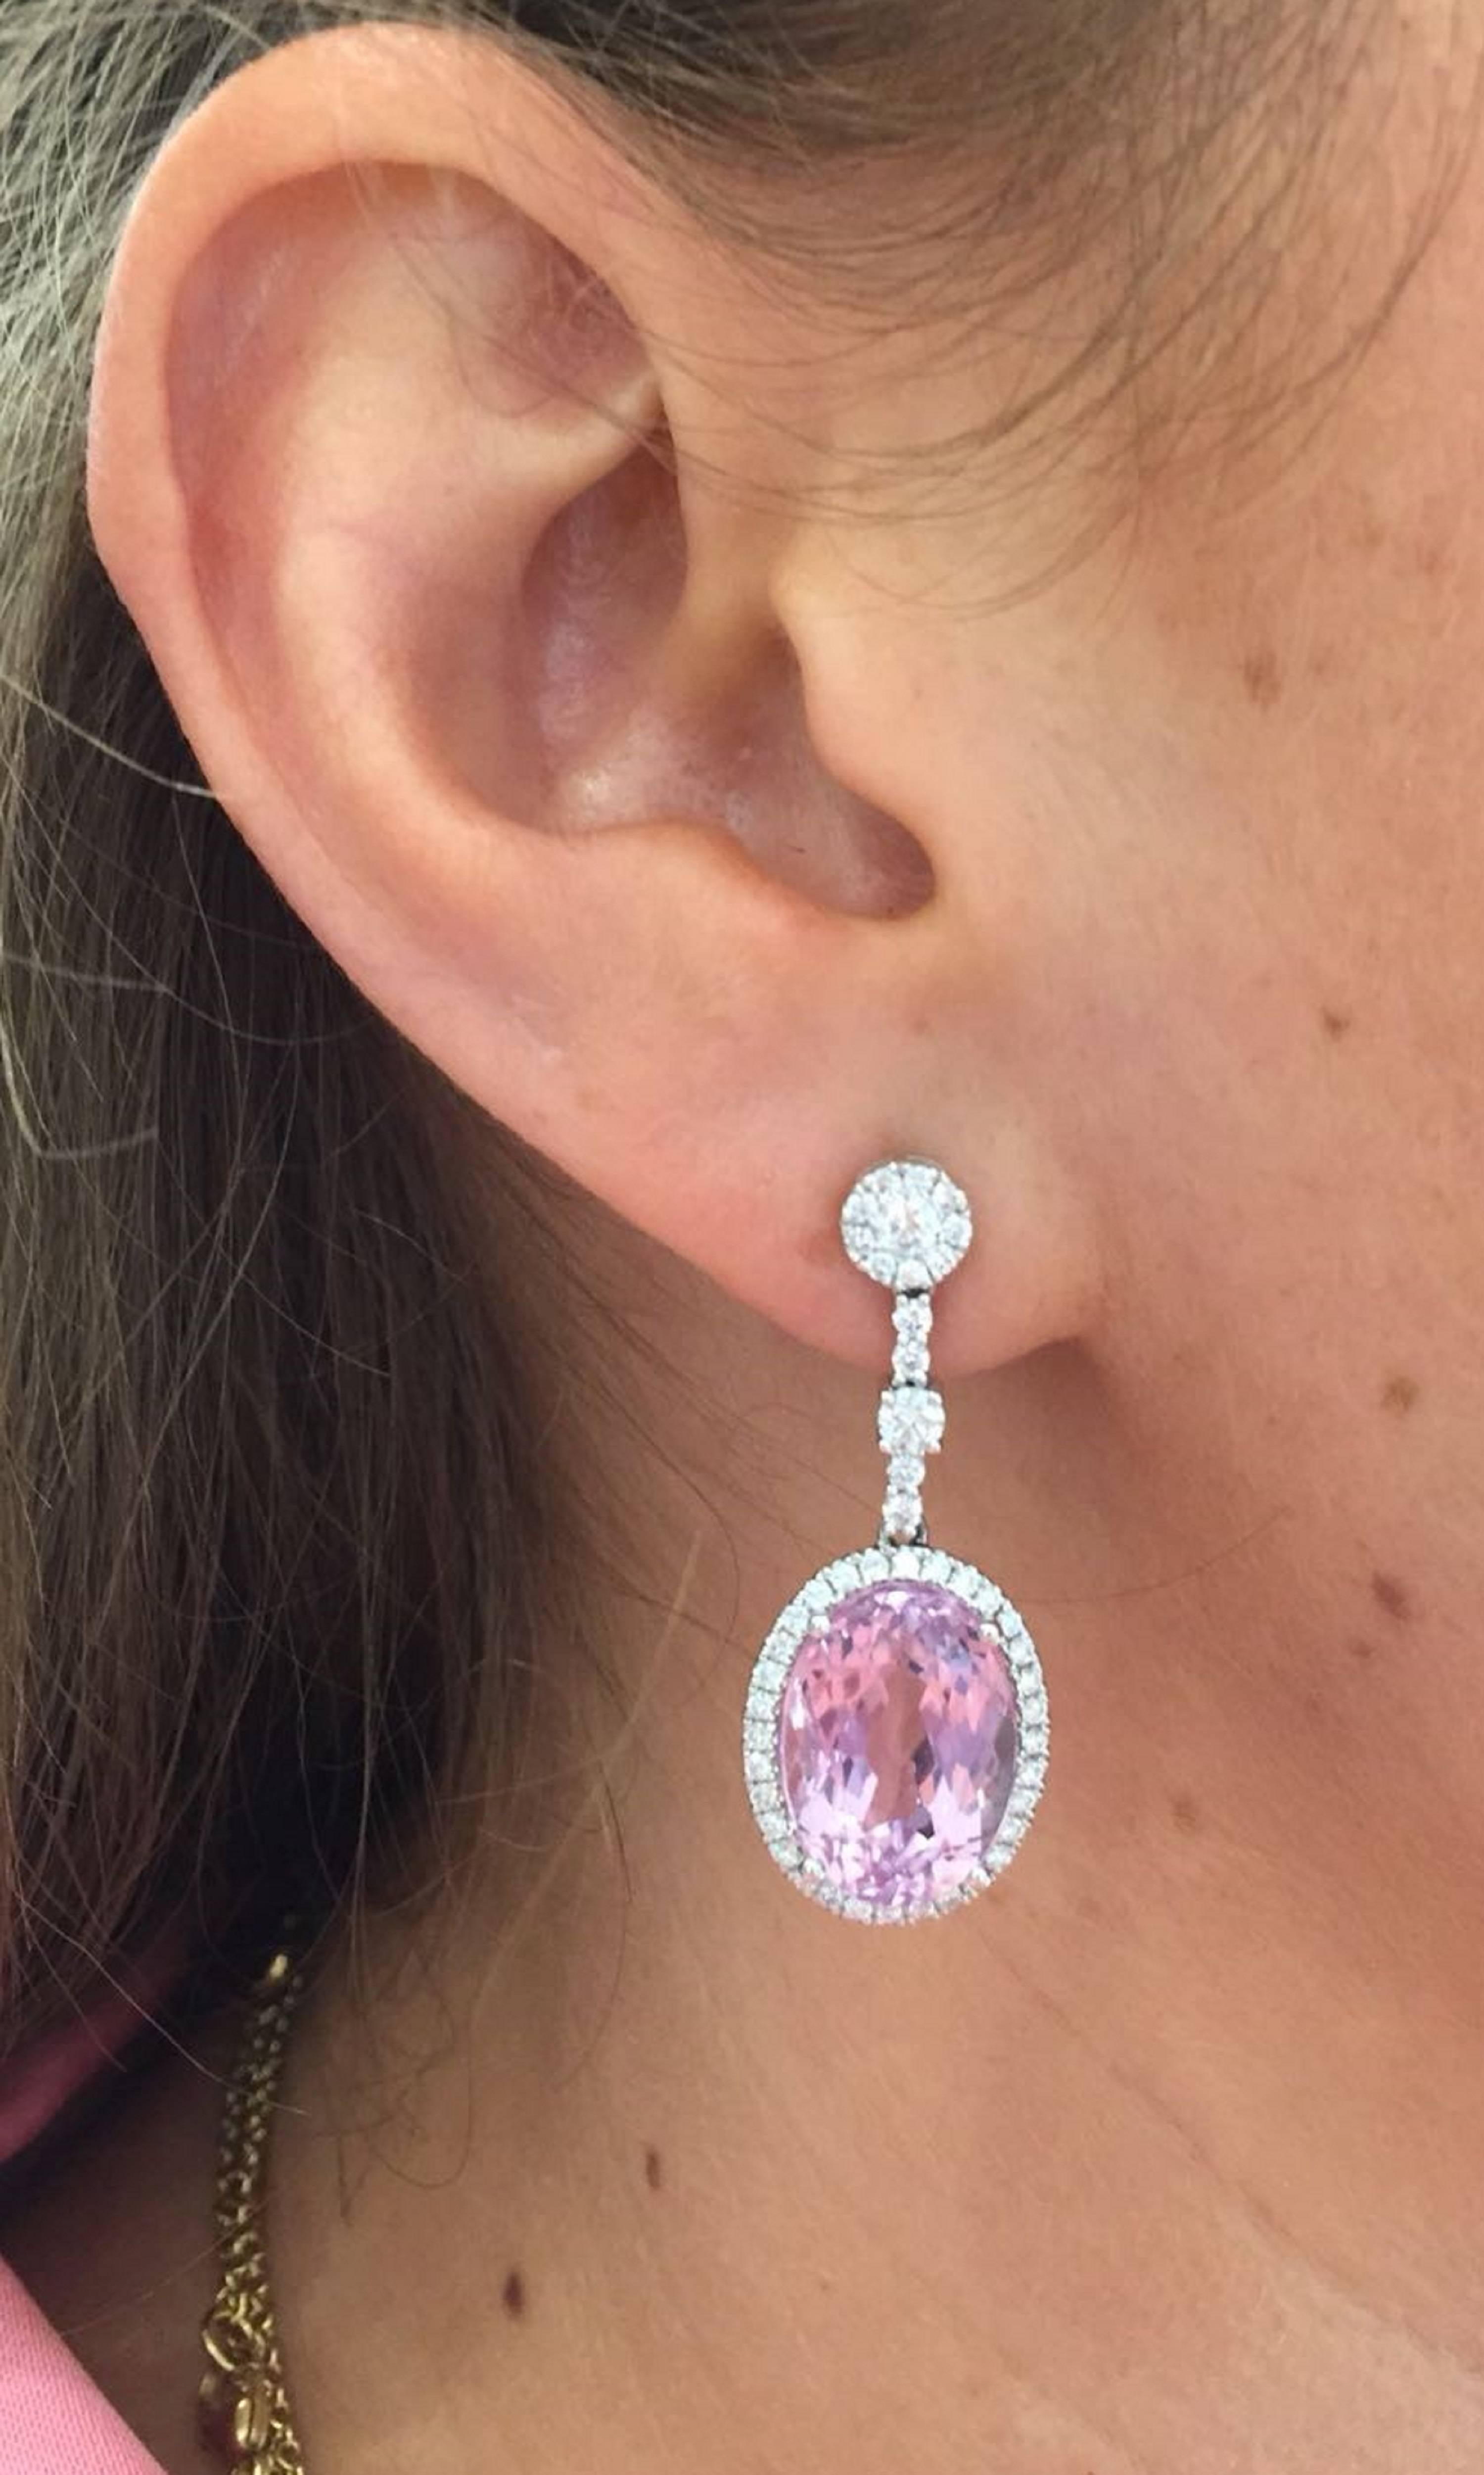 Stunning candy pink earrings for any occasion. These 18ct White Gold and Pink Kunzite (15.86ct) oval drop earrings with Diamond post (0.47ct) and accents are a staple of Kiki McDonough's designs.  By using an unusual stone such as this impressive